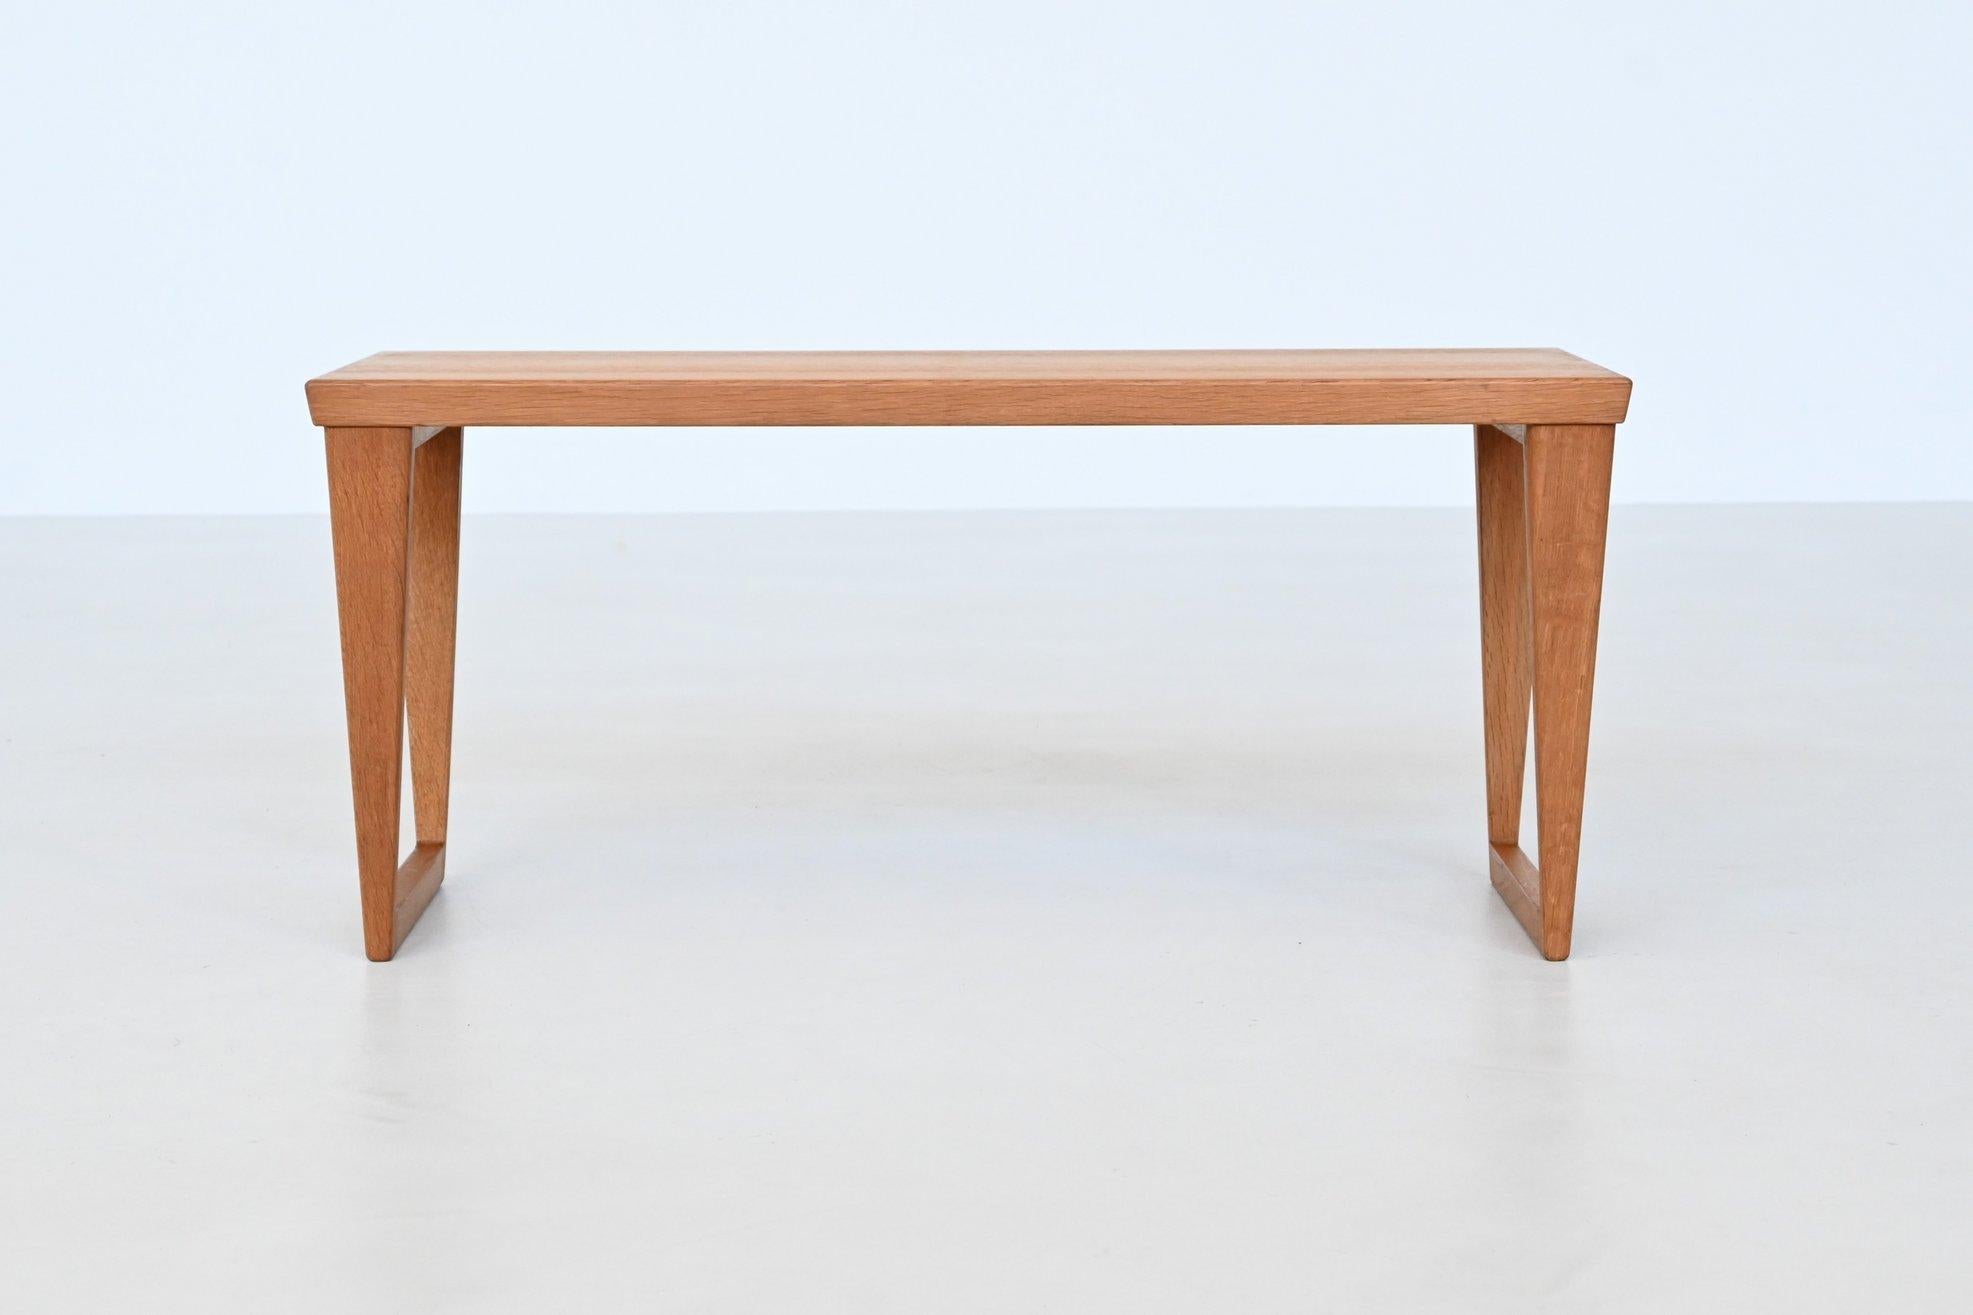 Beautiful minimalistic bench or side table model 36 designed by Kai Kristiansen for Aksel Kjersgaard, Denmark 1960. The bench can be multifunctional as it can also be used as a table. This well-crafted Scandinavian piece is executed in warm oak